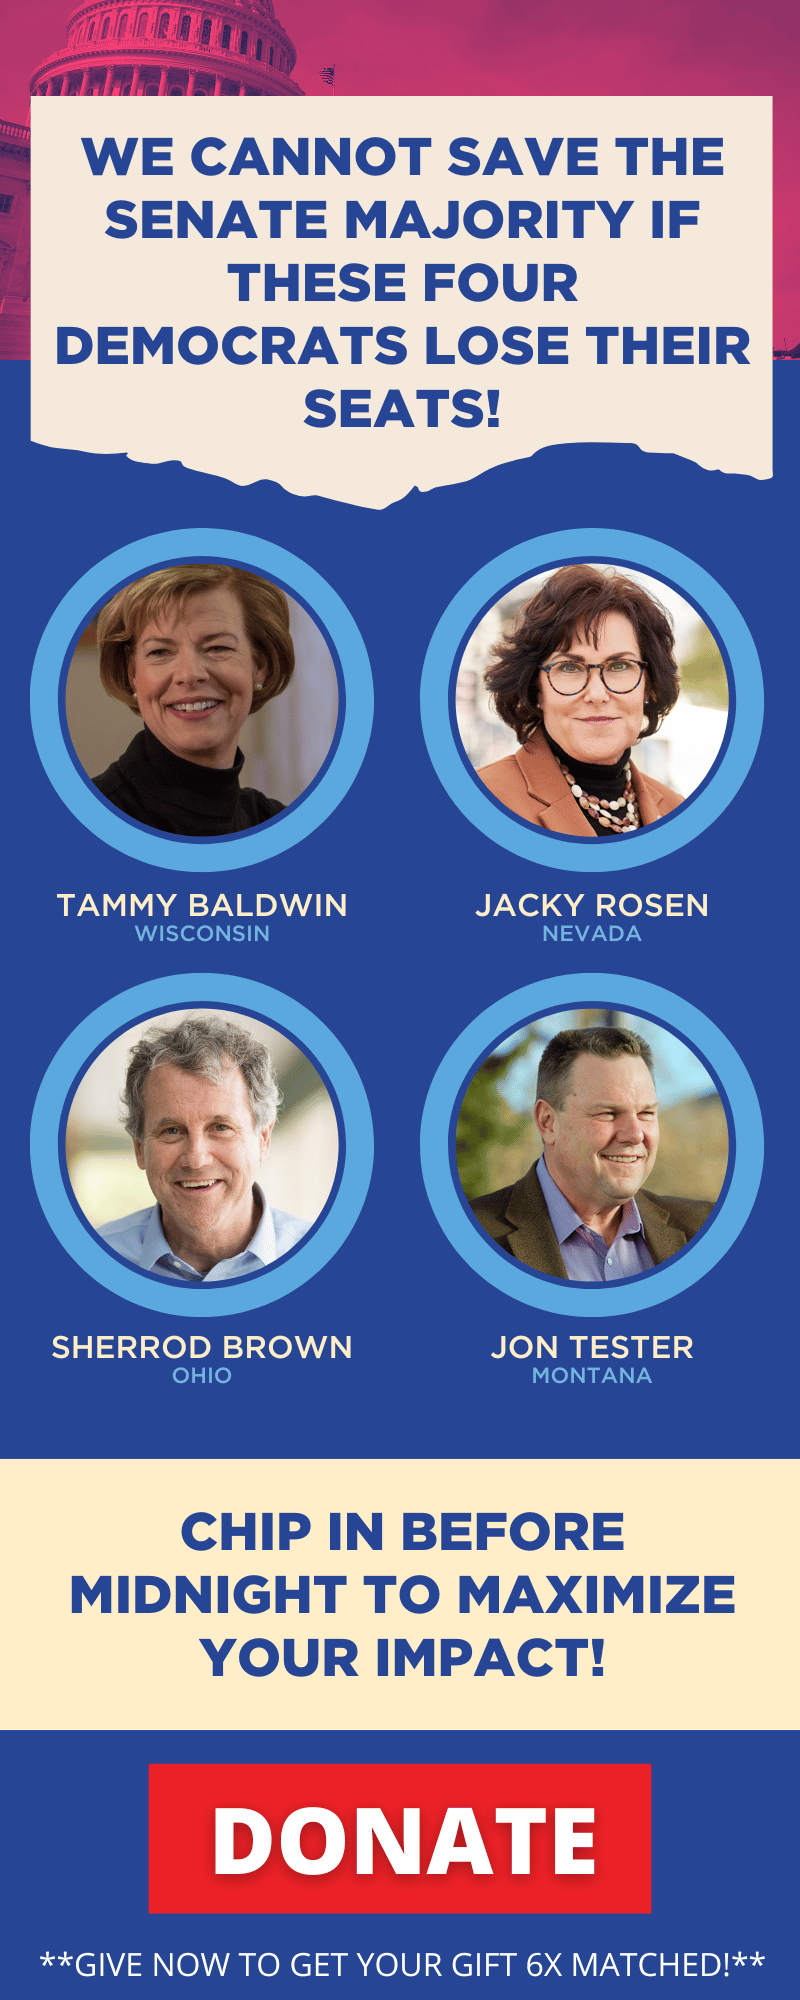 We cannot save the senate majority if these four Democrats lose their seats! Donate now!